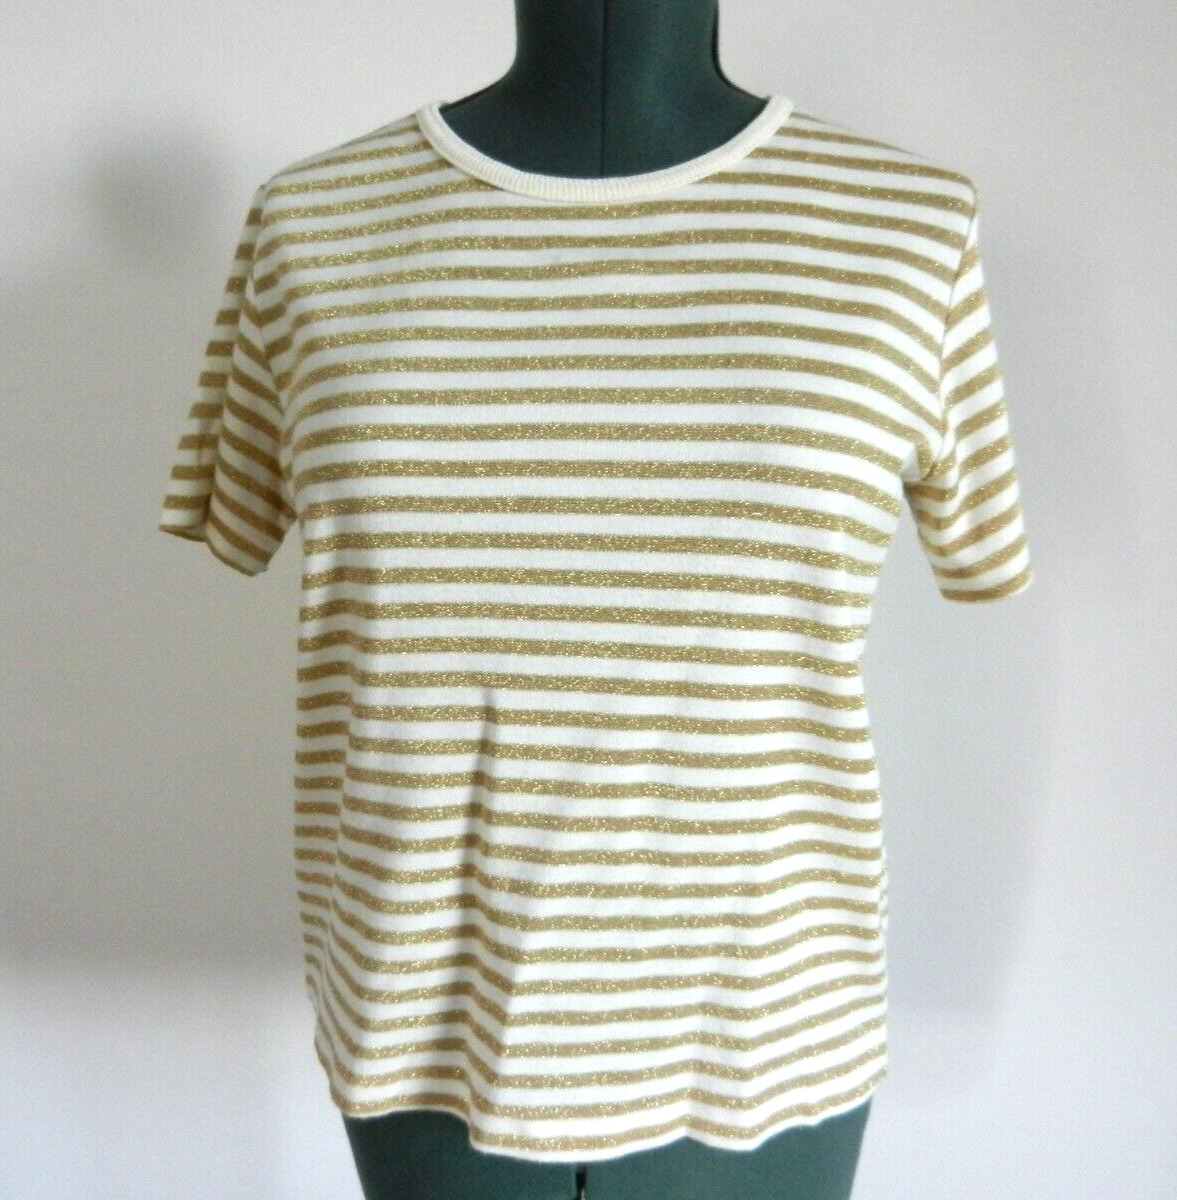 Vintage GRAFF gold and cream striped top size 12 - image 1